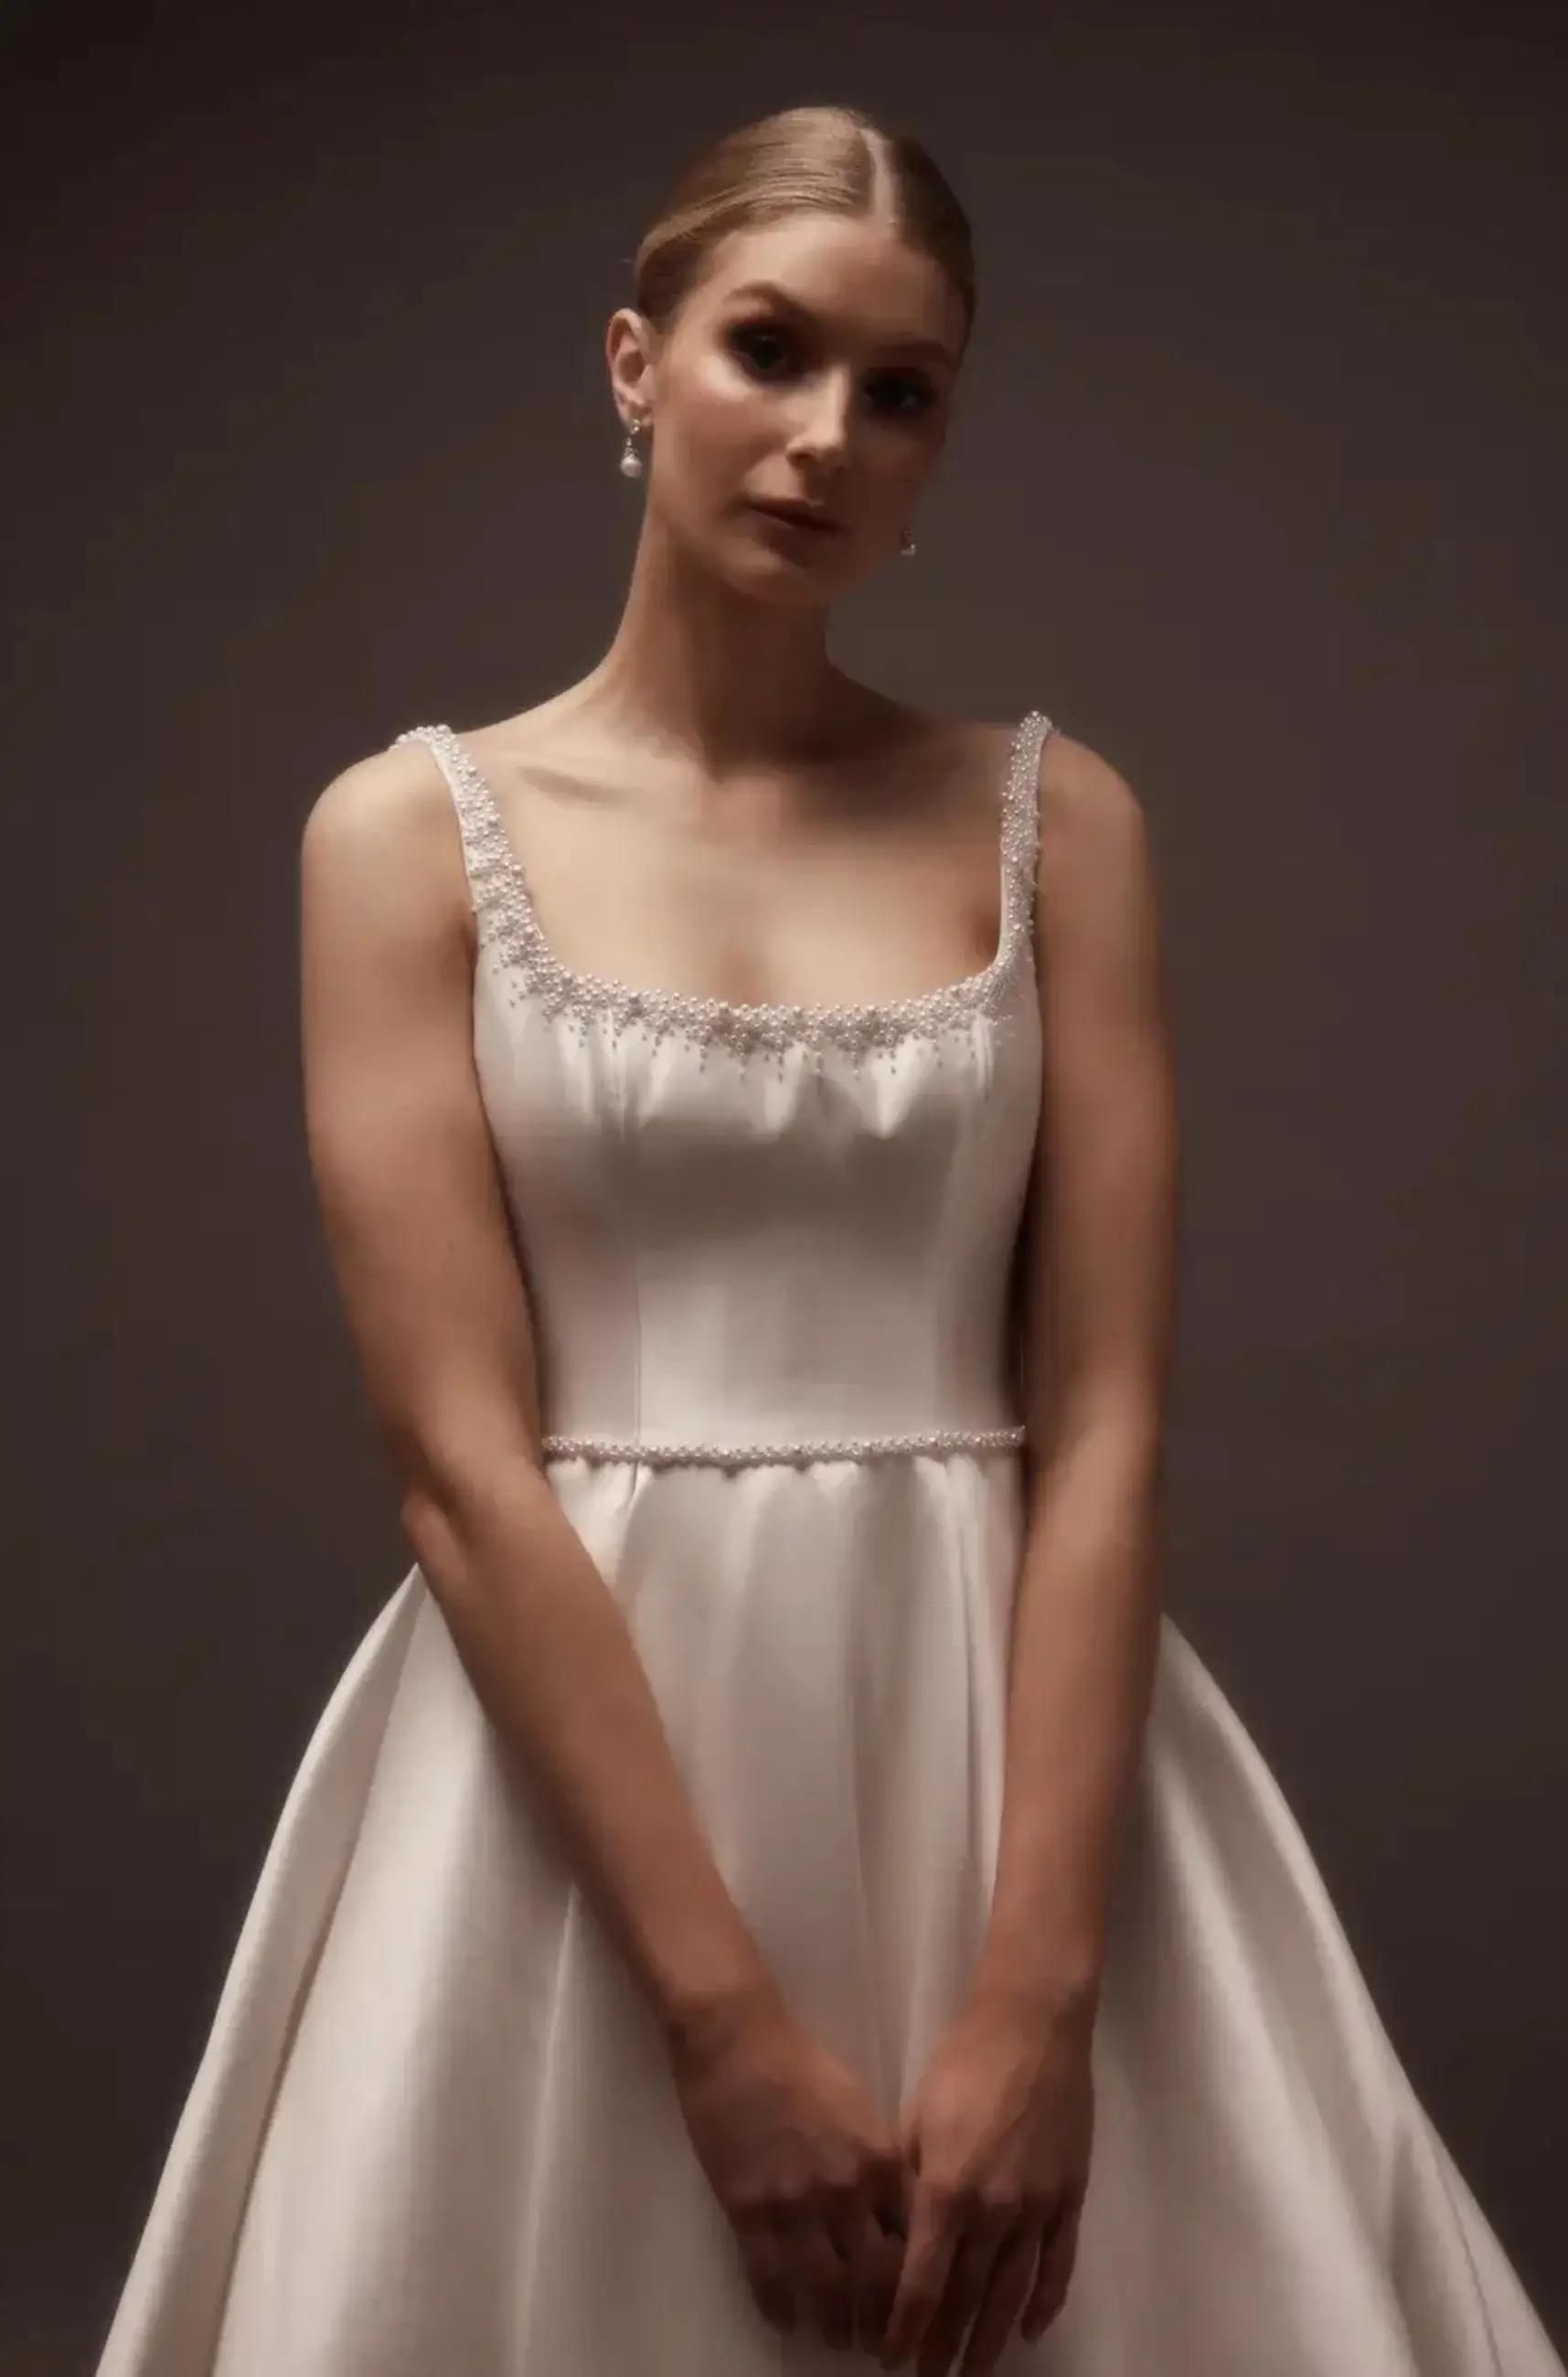 Captivating Elegance: The Rising Trend of Pearl-Detailed Wedding Dresses Image